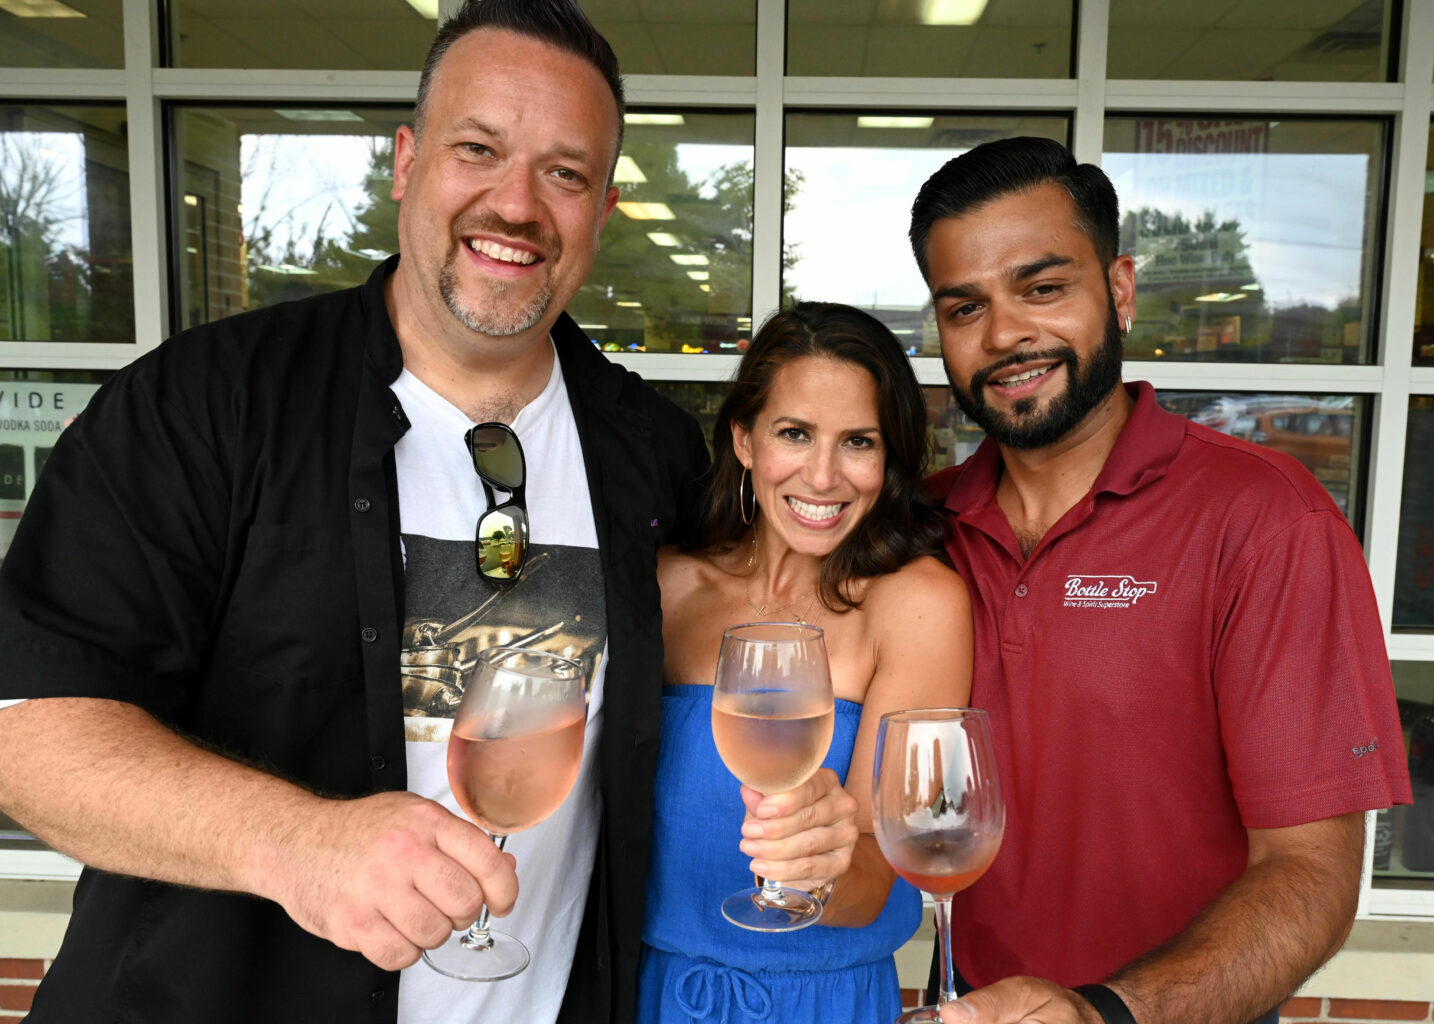 Chef Plum and Marysol Castro raise a glass of rosé with G. Patel, owner of Bottle Stop Wine & Spirits Superstore in Newtown. Photo: Ryan Caron King / Connecticut Public